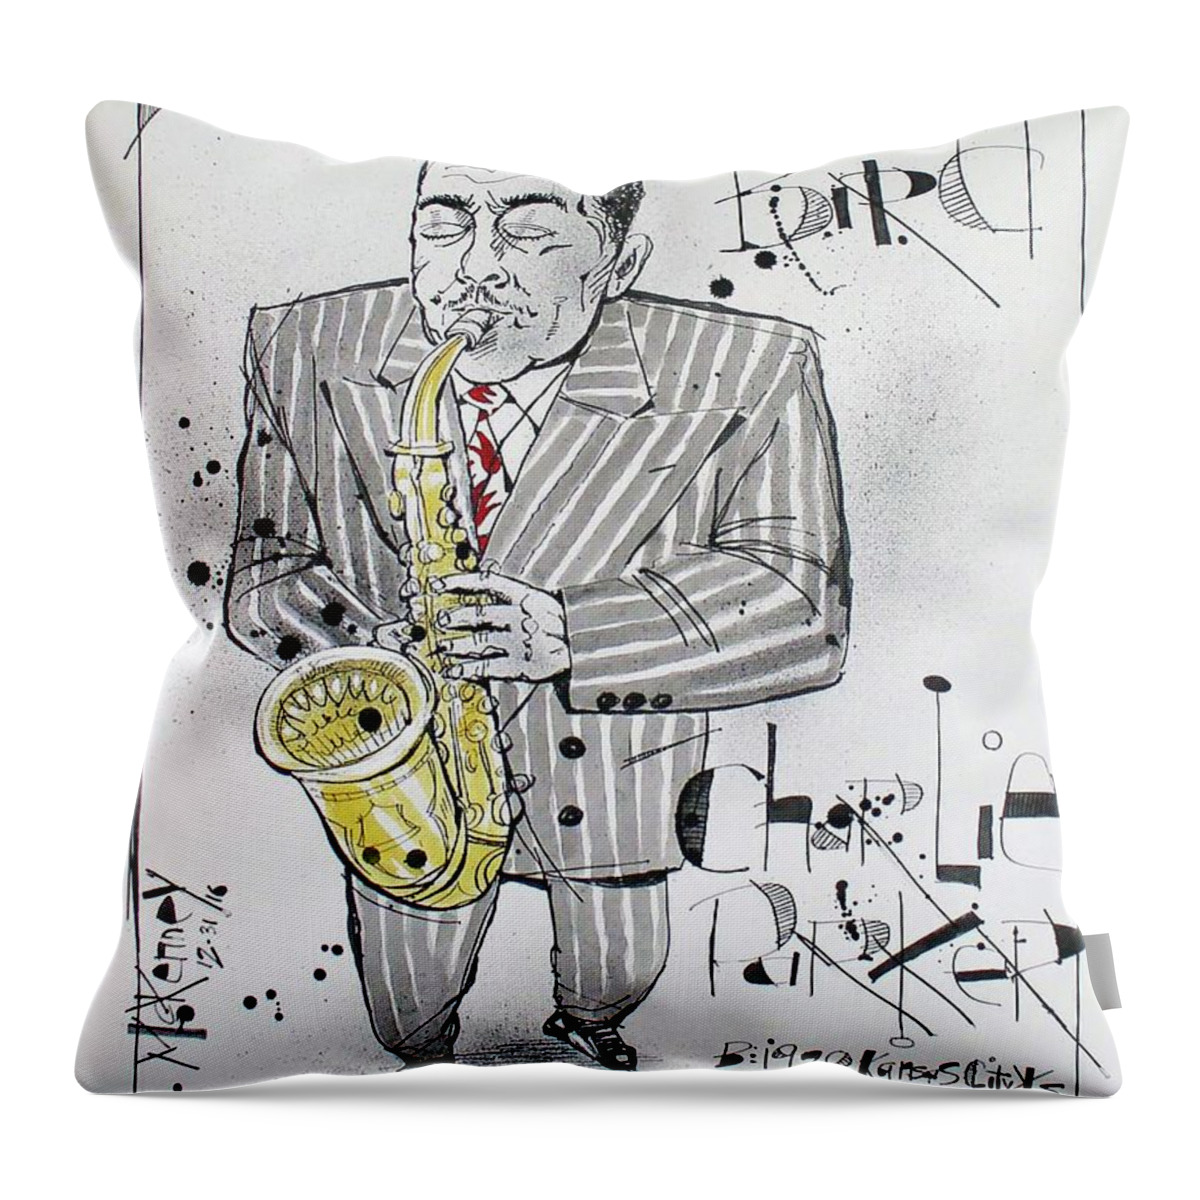  Throw Pillow featuring the drawing Charlie Parker by Phil Mckenney